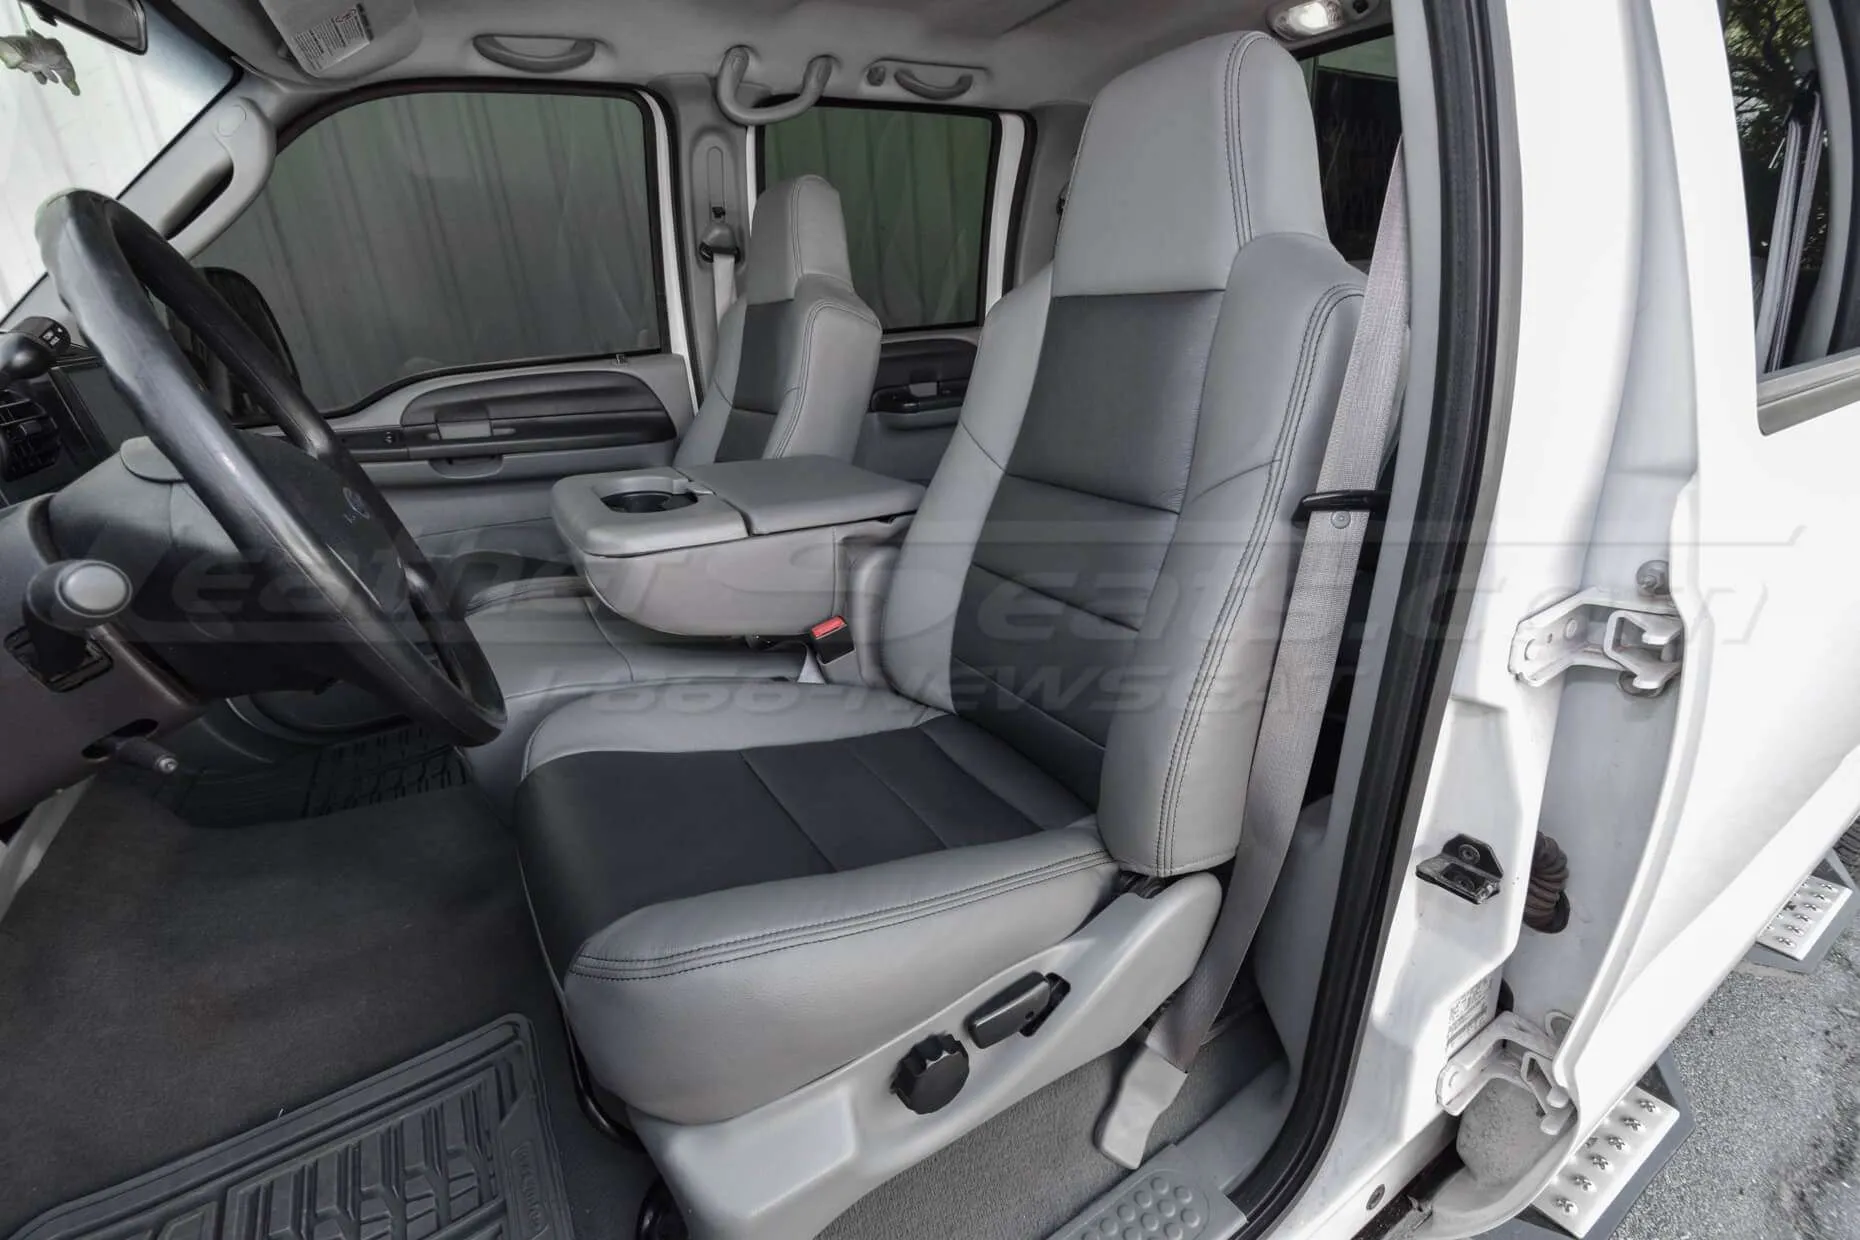 Installed leather seats for Ford Superduty - Front drivers side